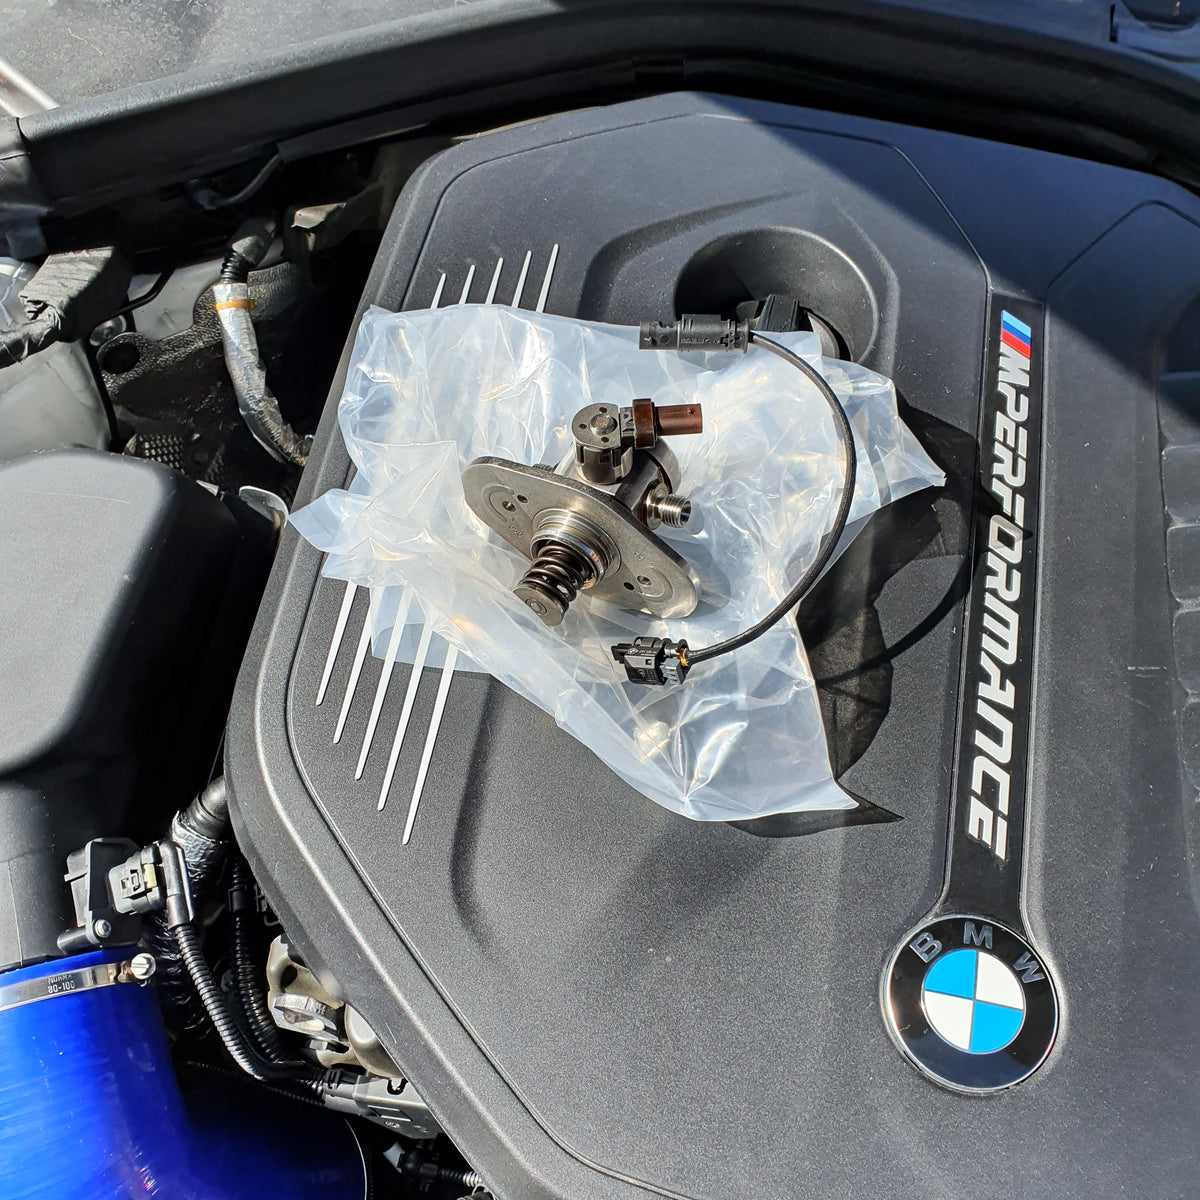 The Best Mods, and tuning for the BMW F20 F21 engine